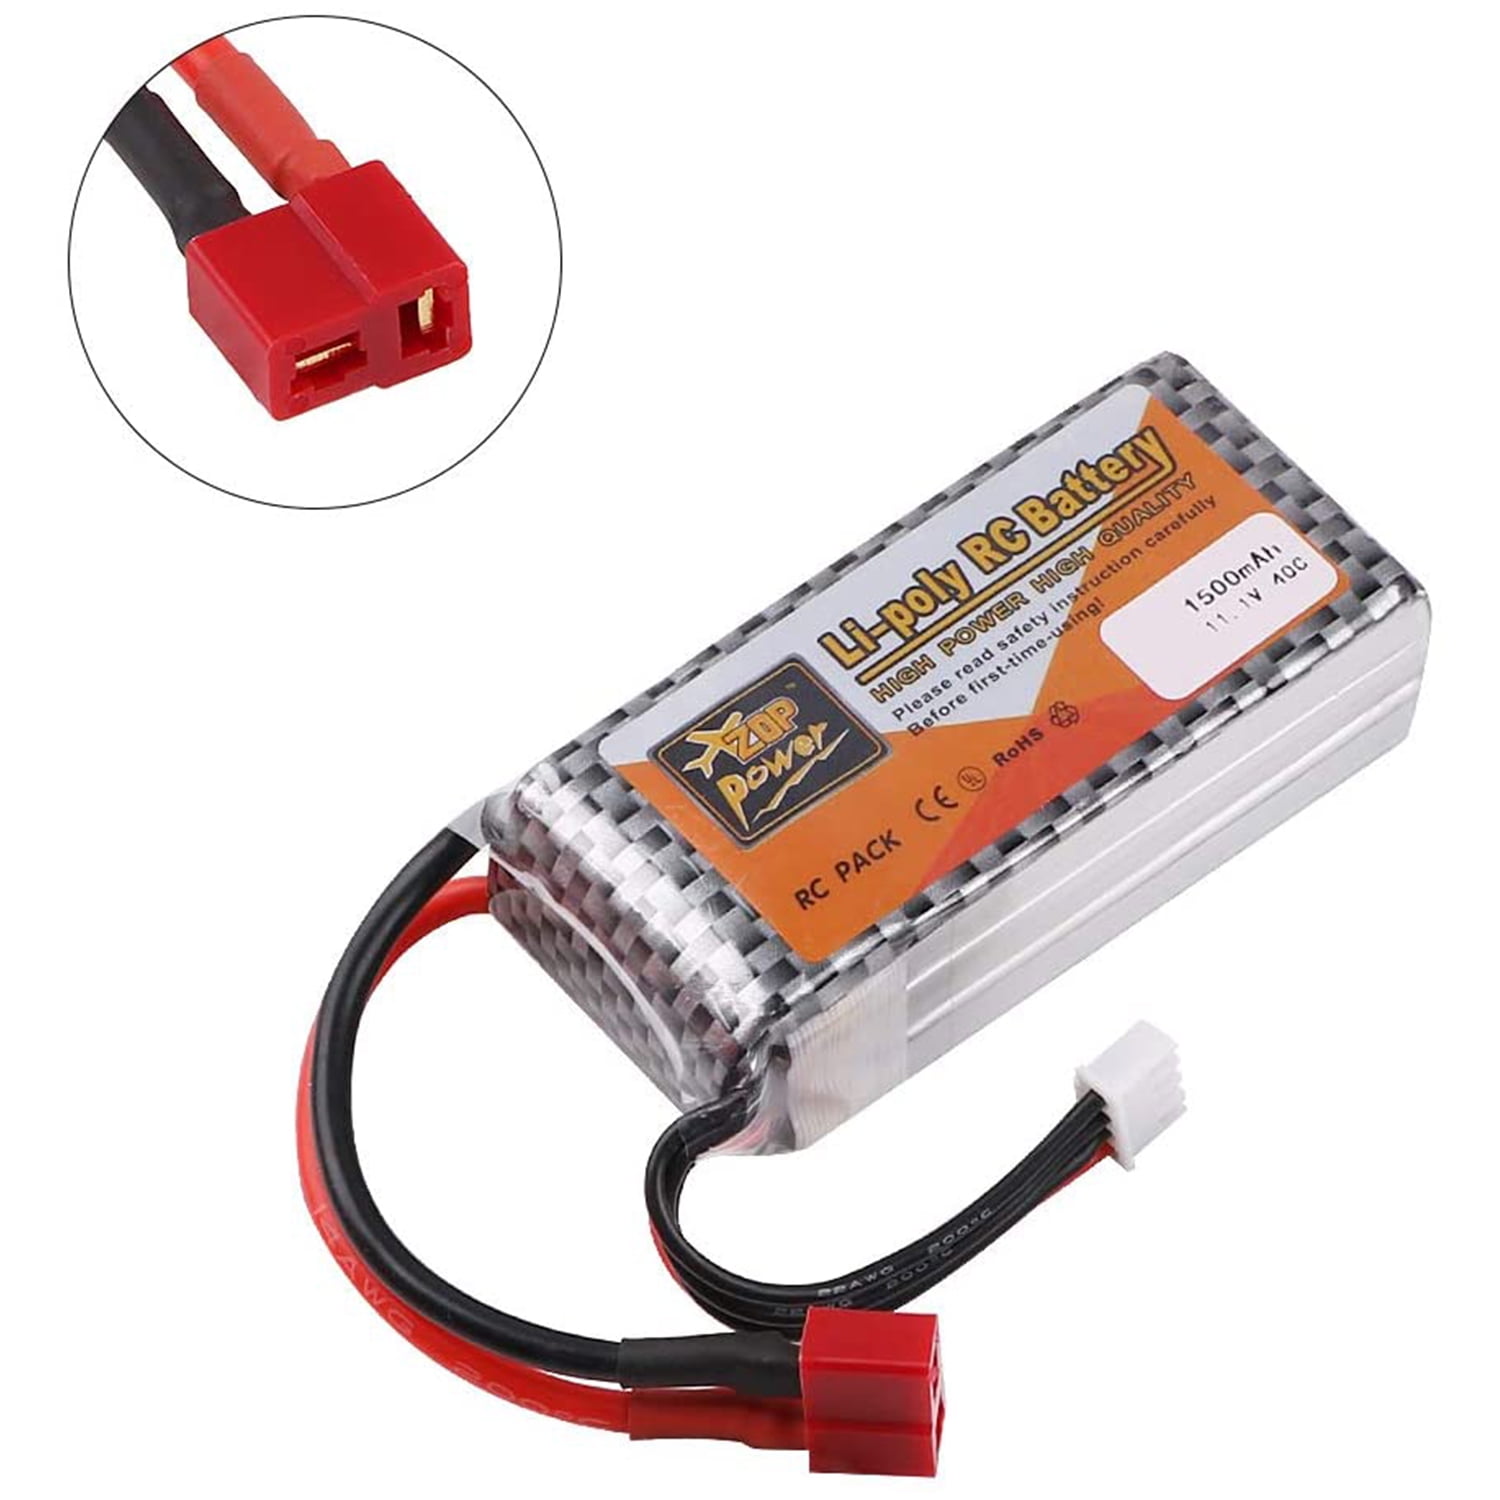 FancyWhoop 3S LiPo Battery 40C 1500mAh 11.1V RC Motor Batteries W/ Deans T Plug Connector RC Car Airplane Helicopter DIY Part - Walmart.com